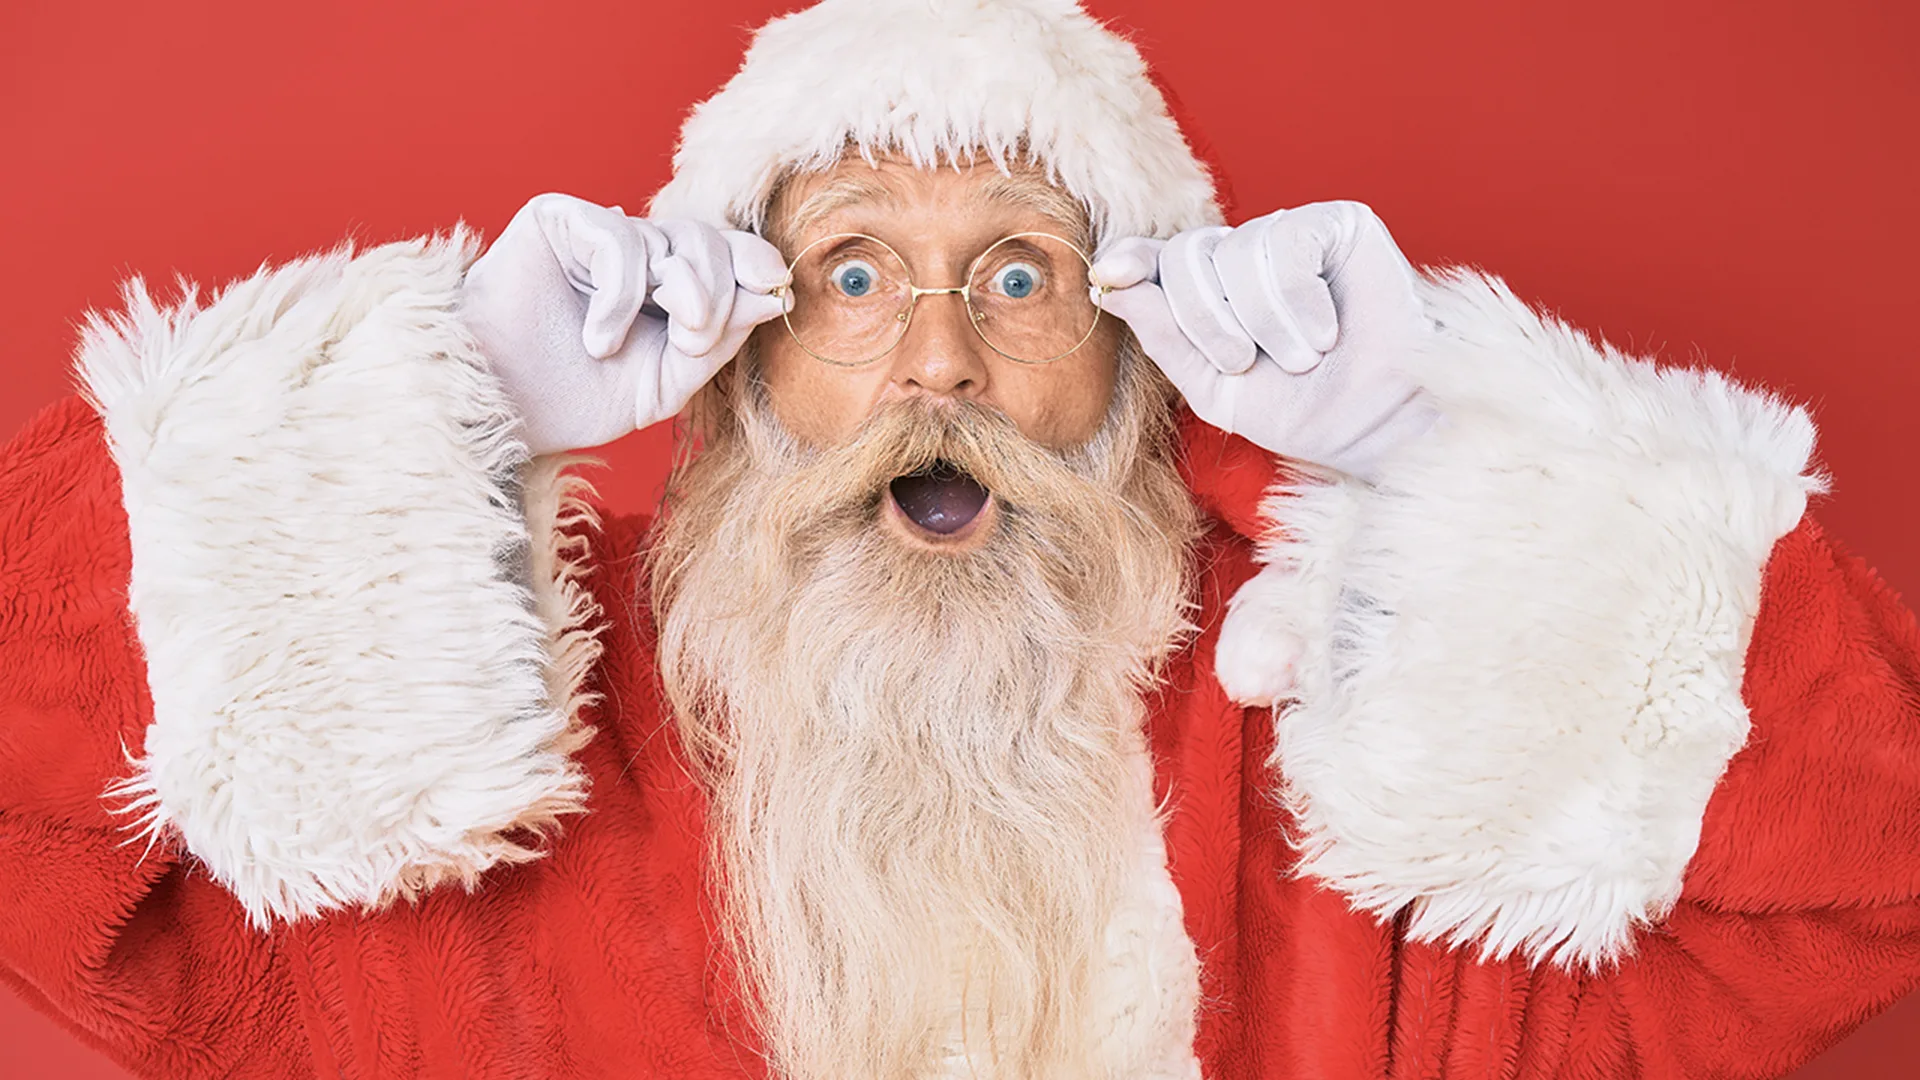 Close-up of Santa Claus in traditional red and white attire holding glasses with his mouth open.